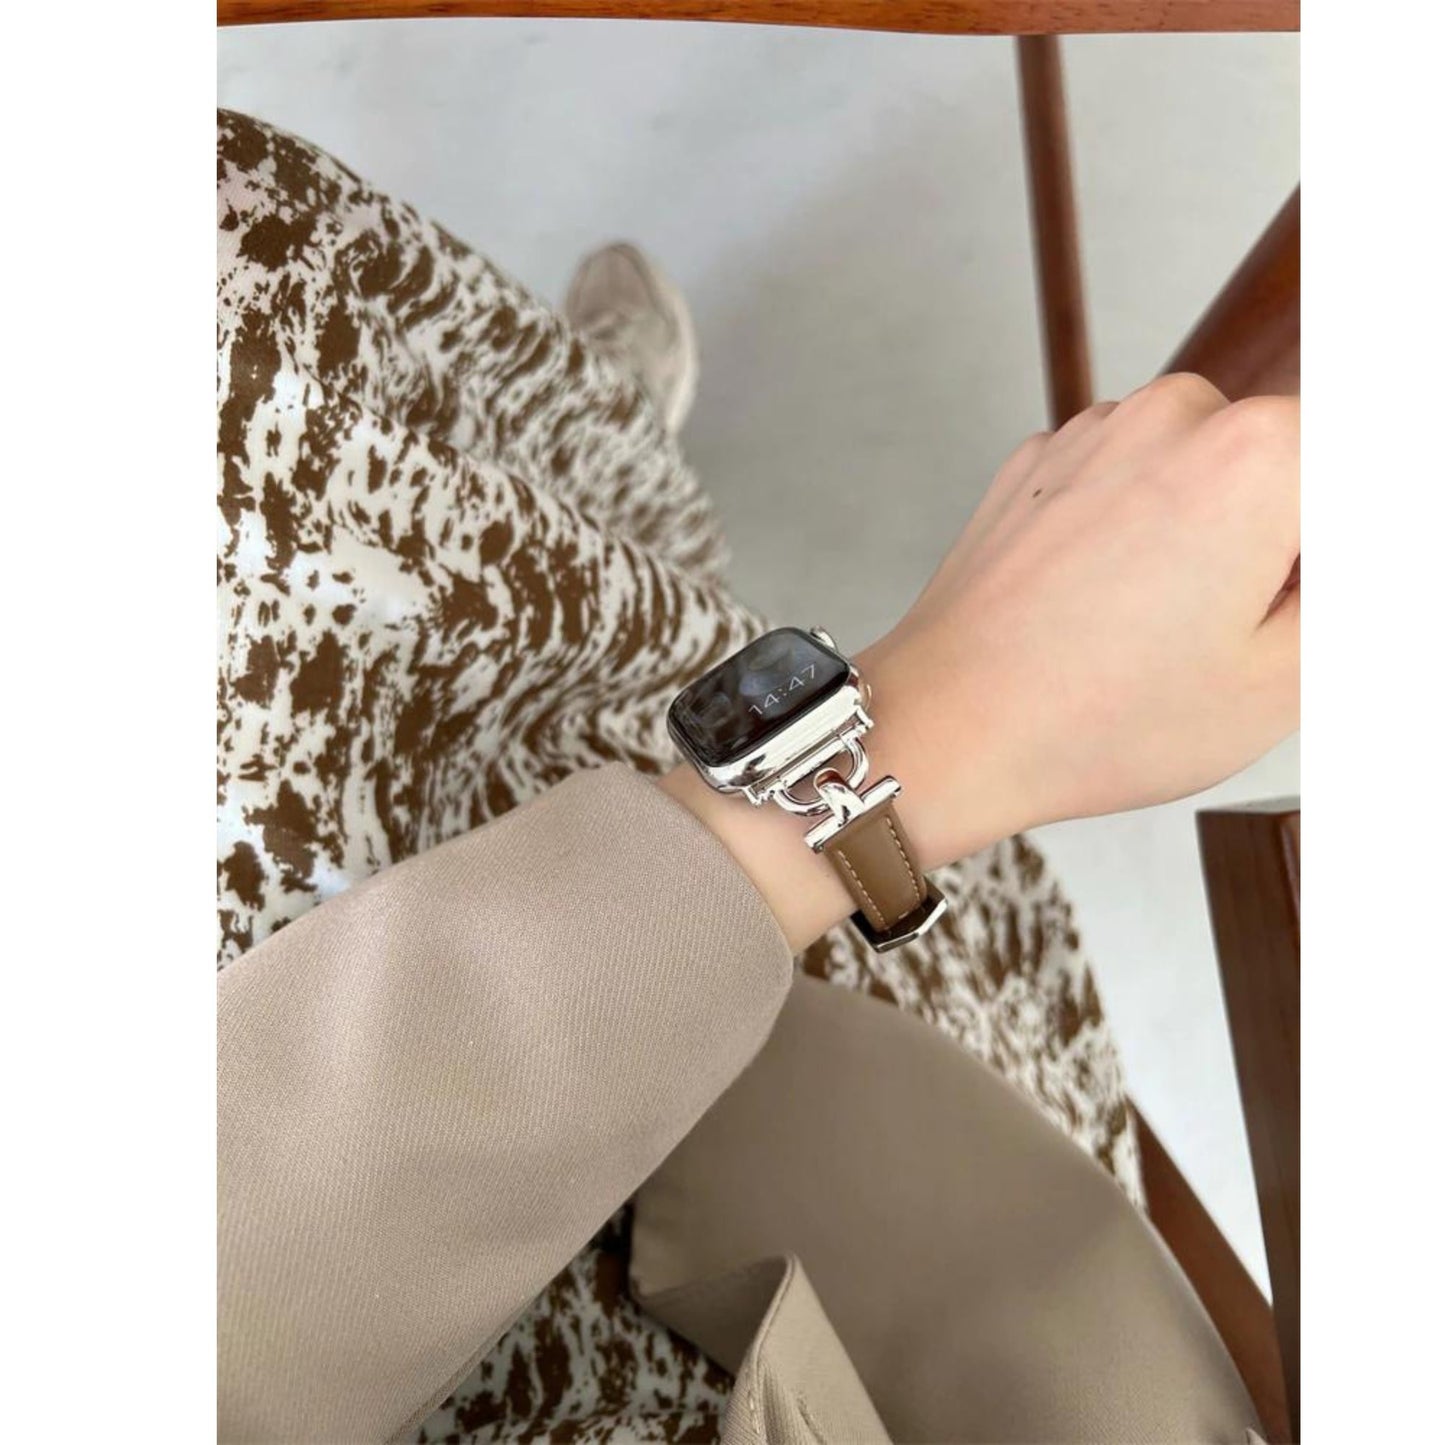 Slim Metal Hook Style Leather Apple Watch Band